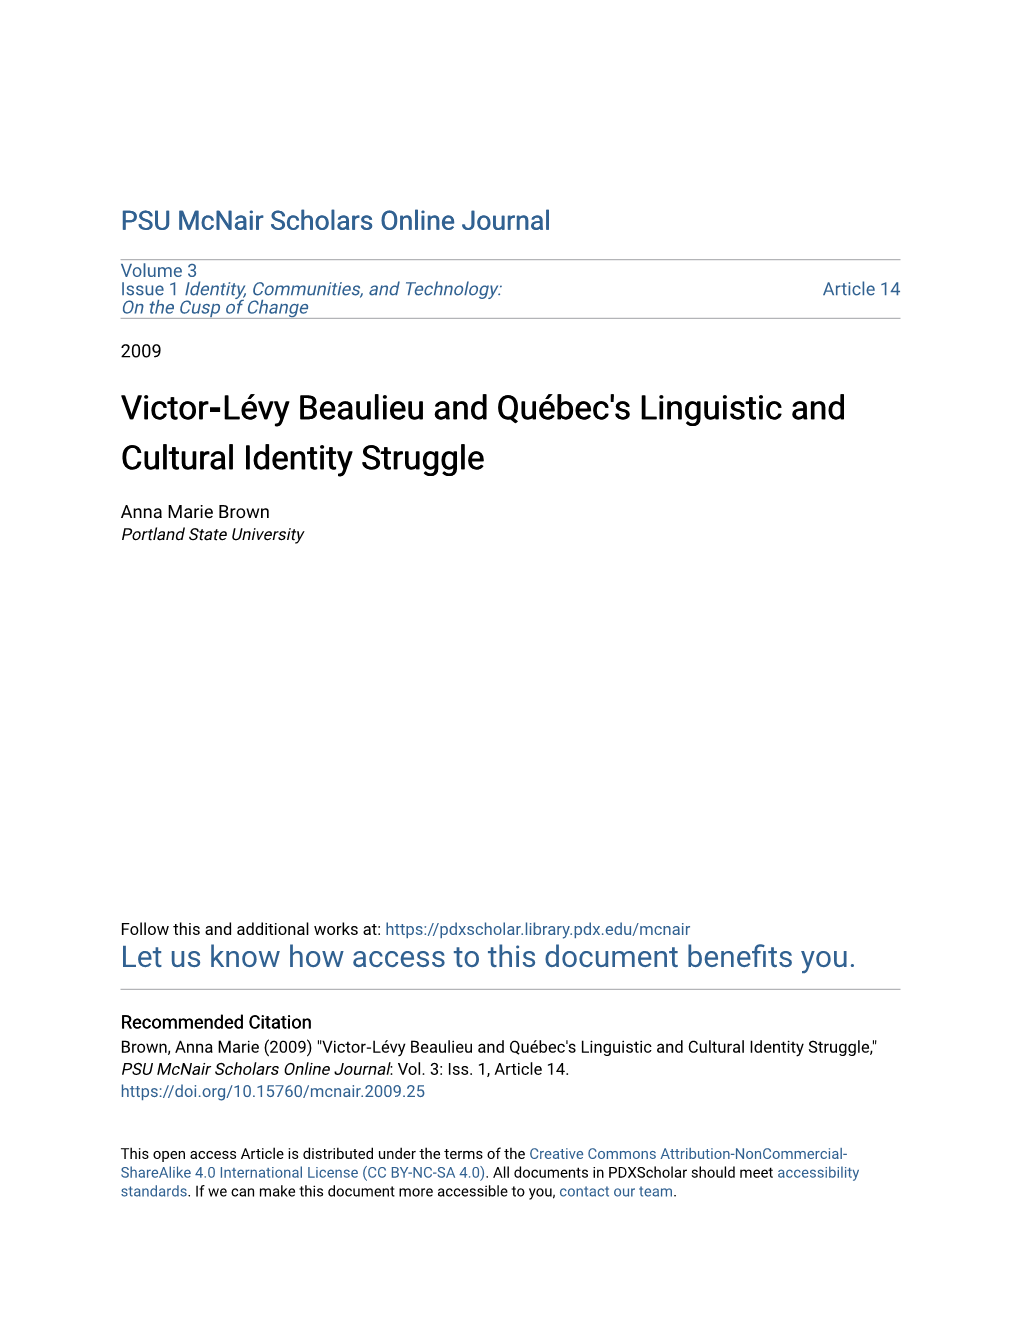 Victor‐Lévy Beaulieu and Québec's Linguistic and Cultural Identity Struggle